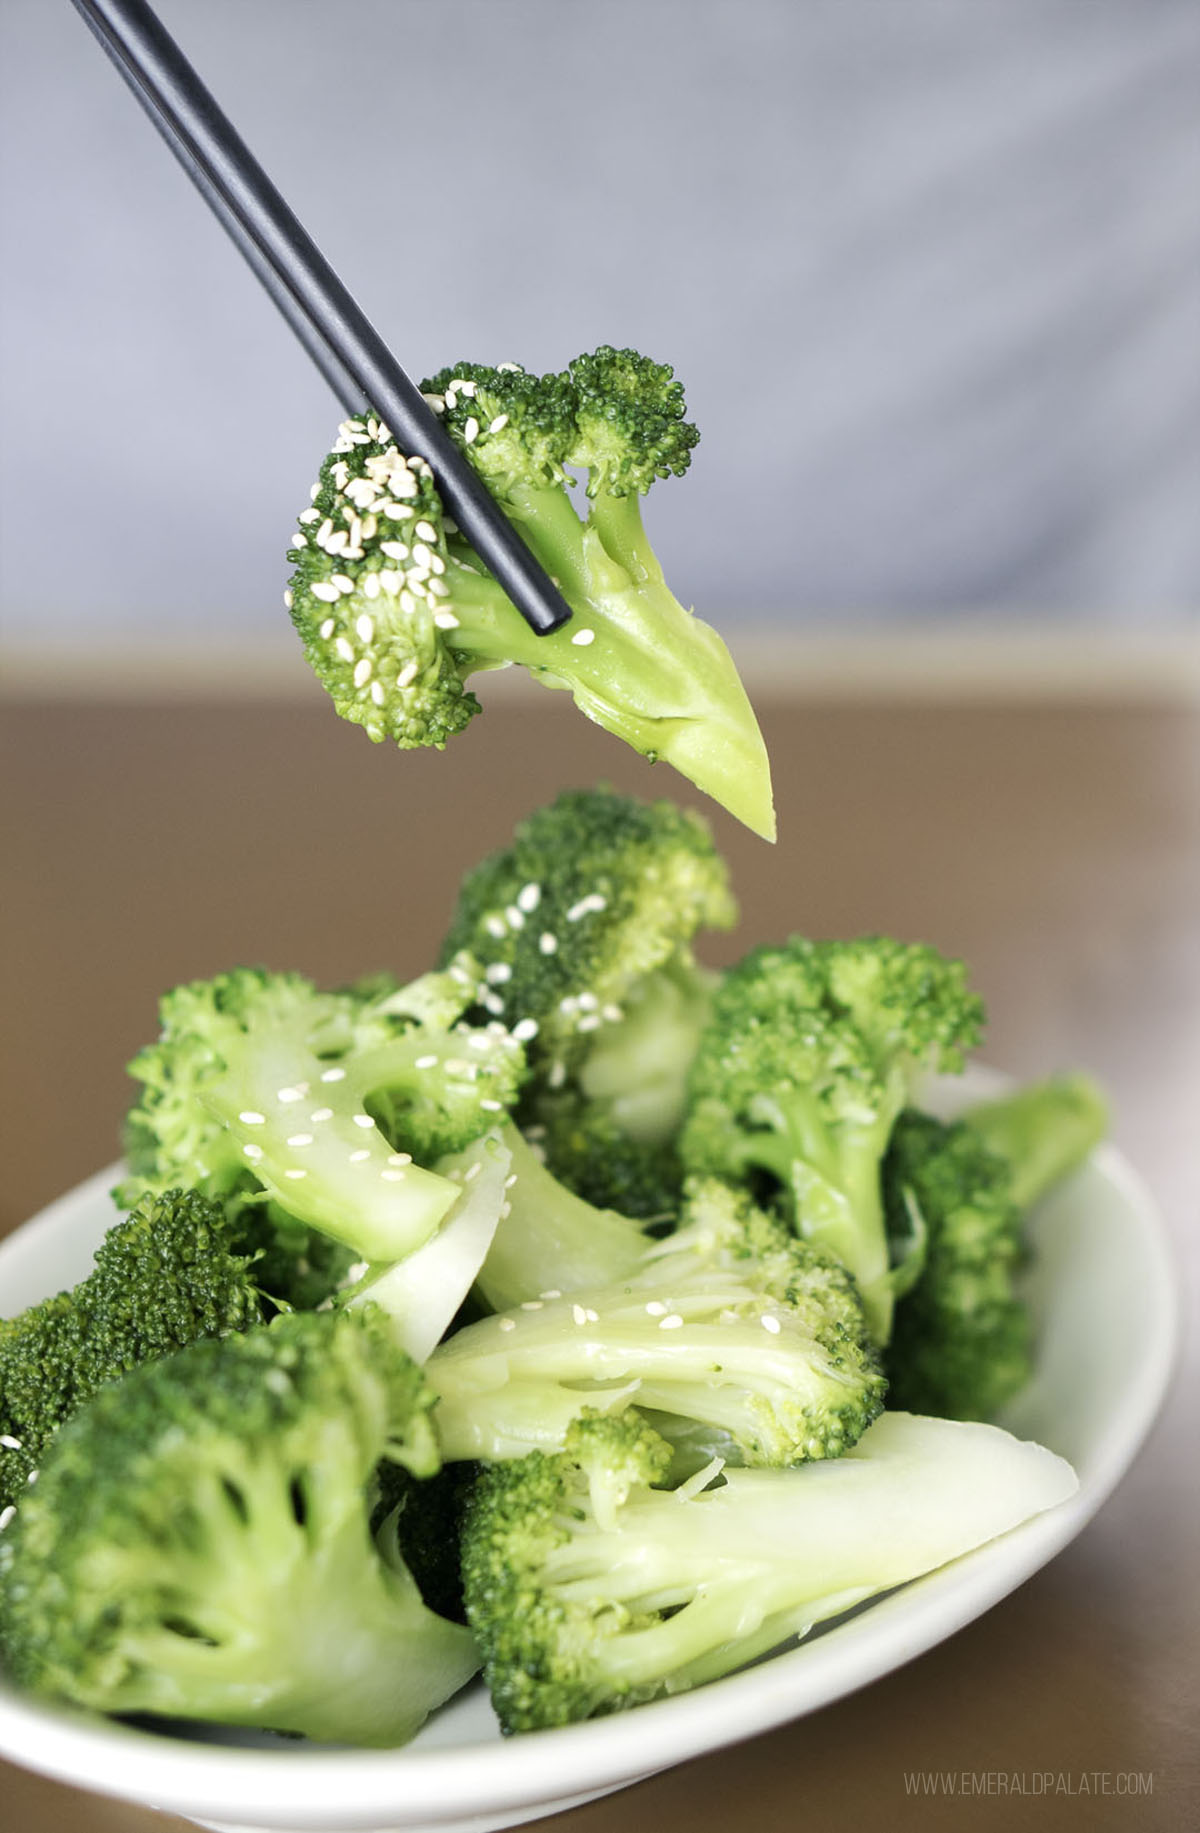 person picking up broccoli with a chopstick